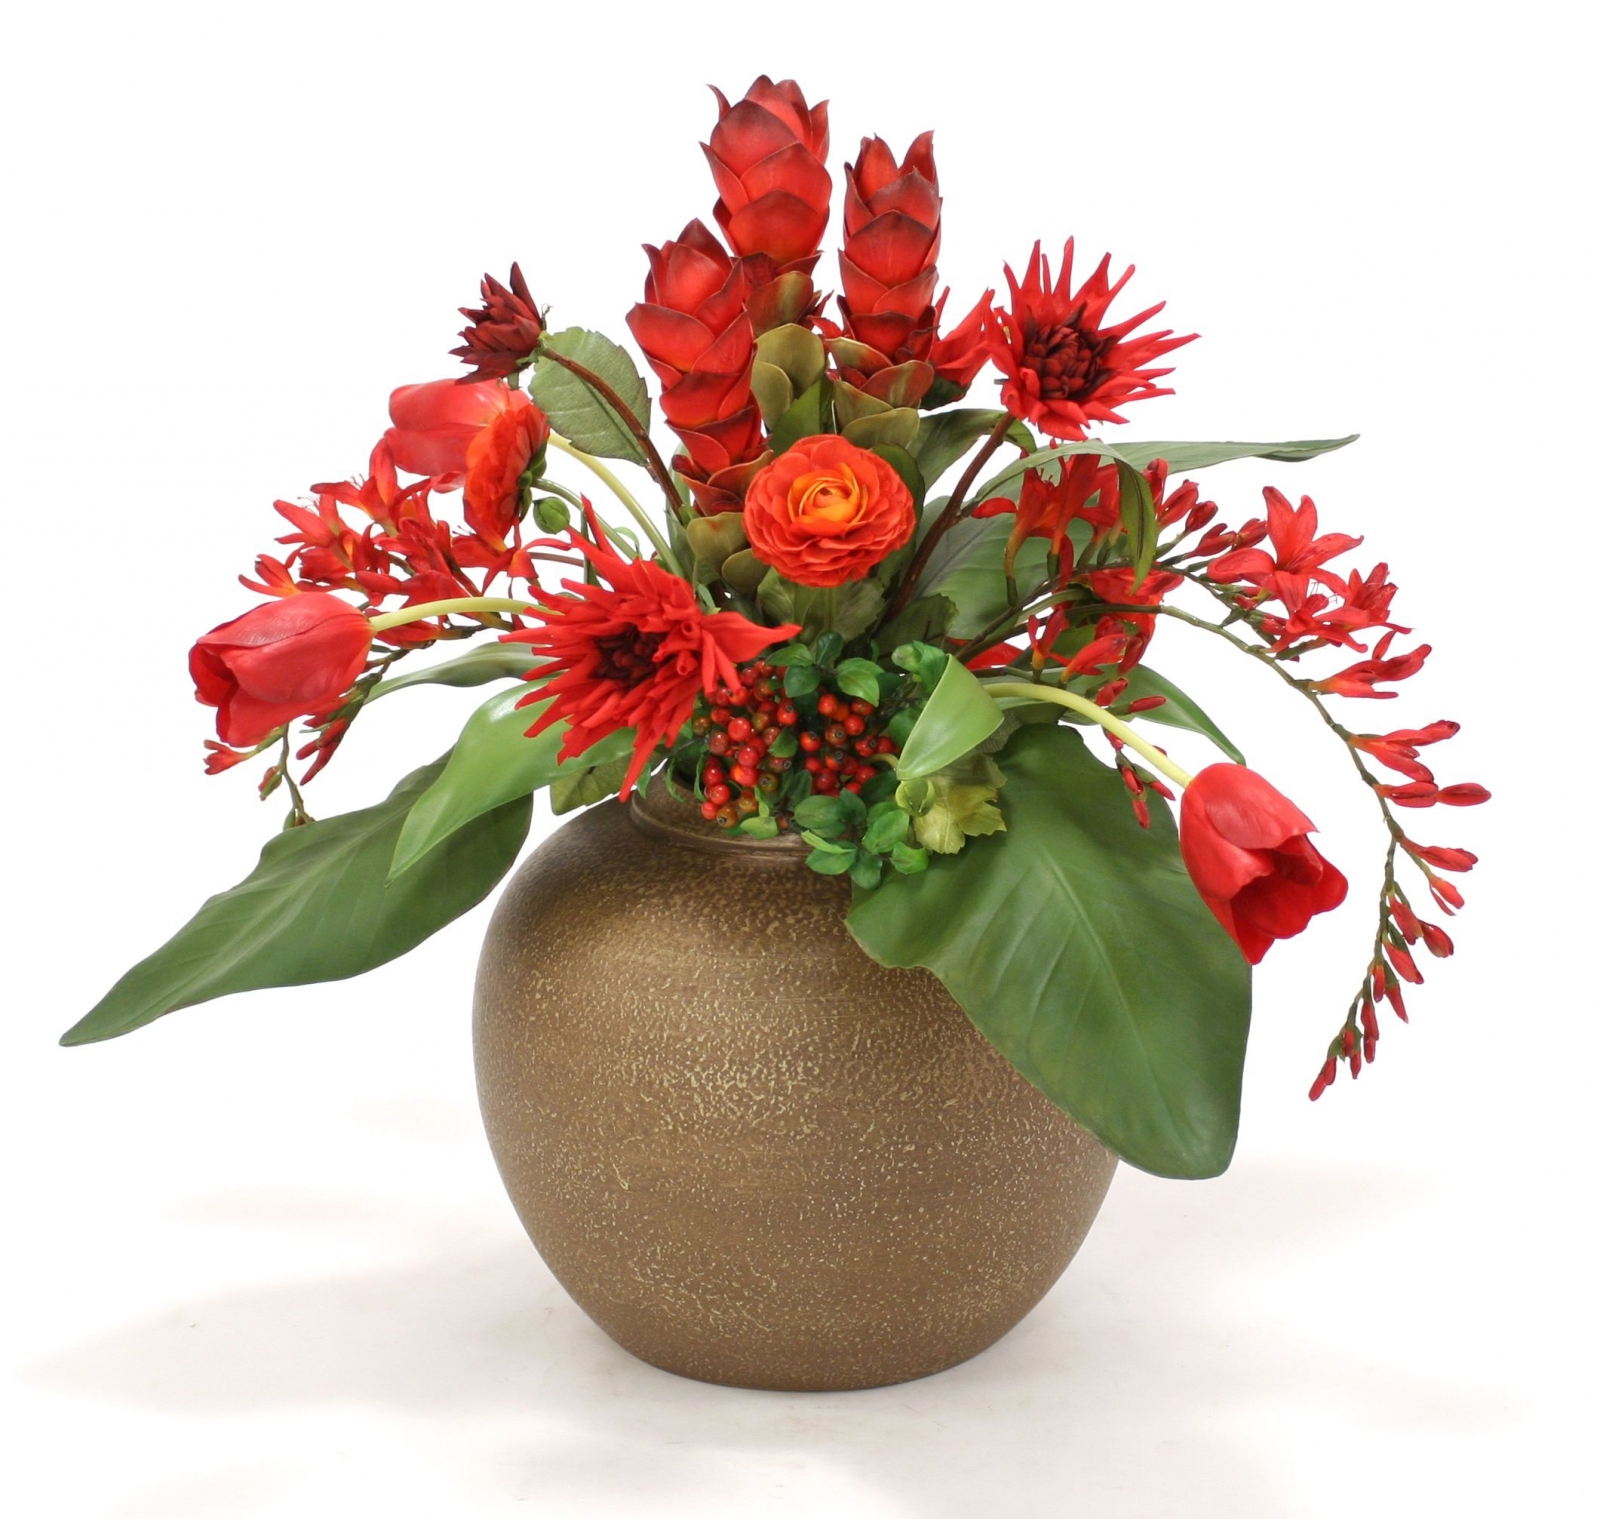 Tropical Fall Mix of Flowers in Fat Tuscan Brown Vase